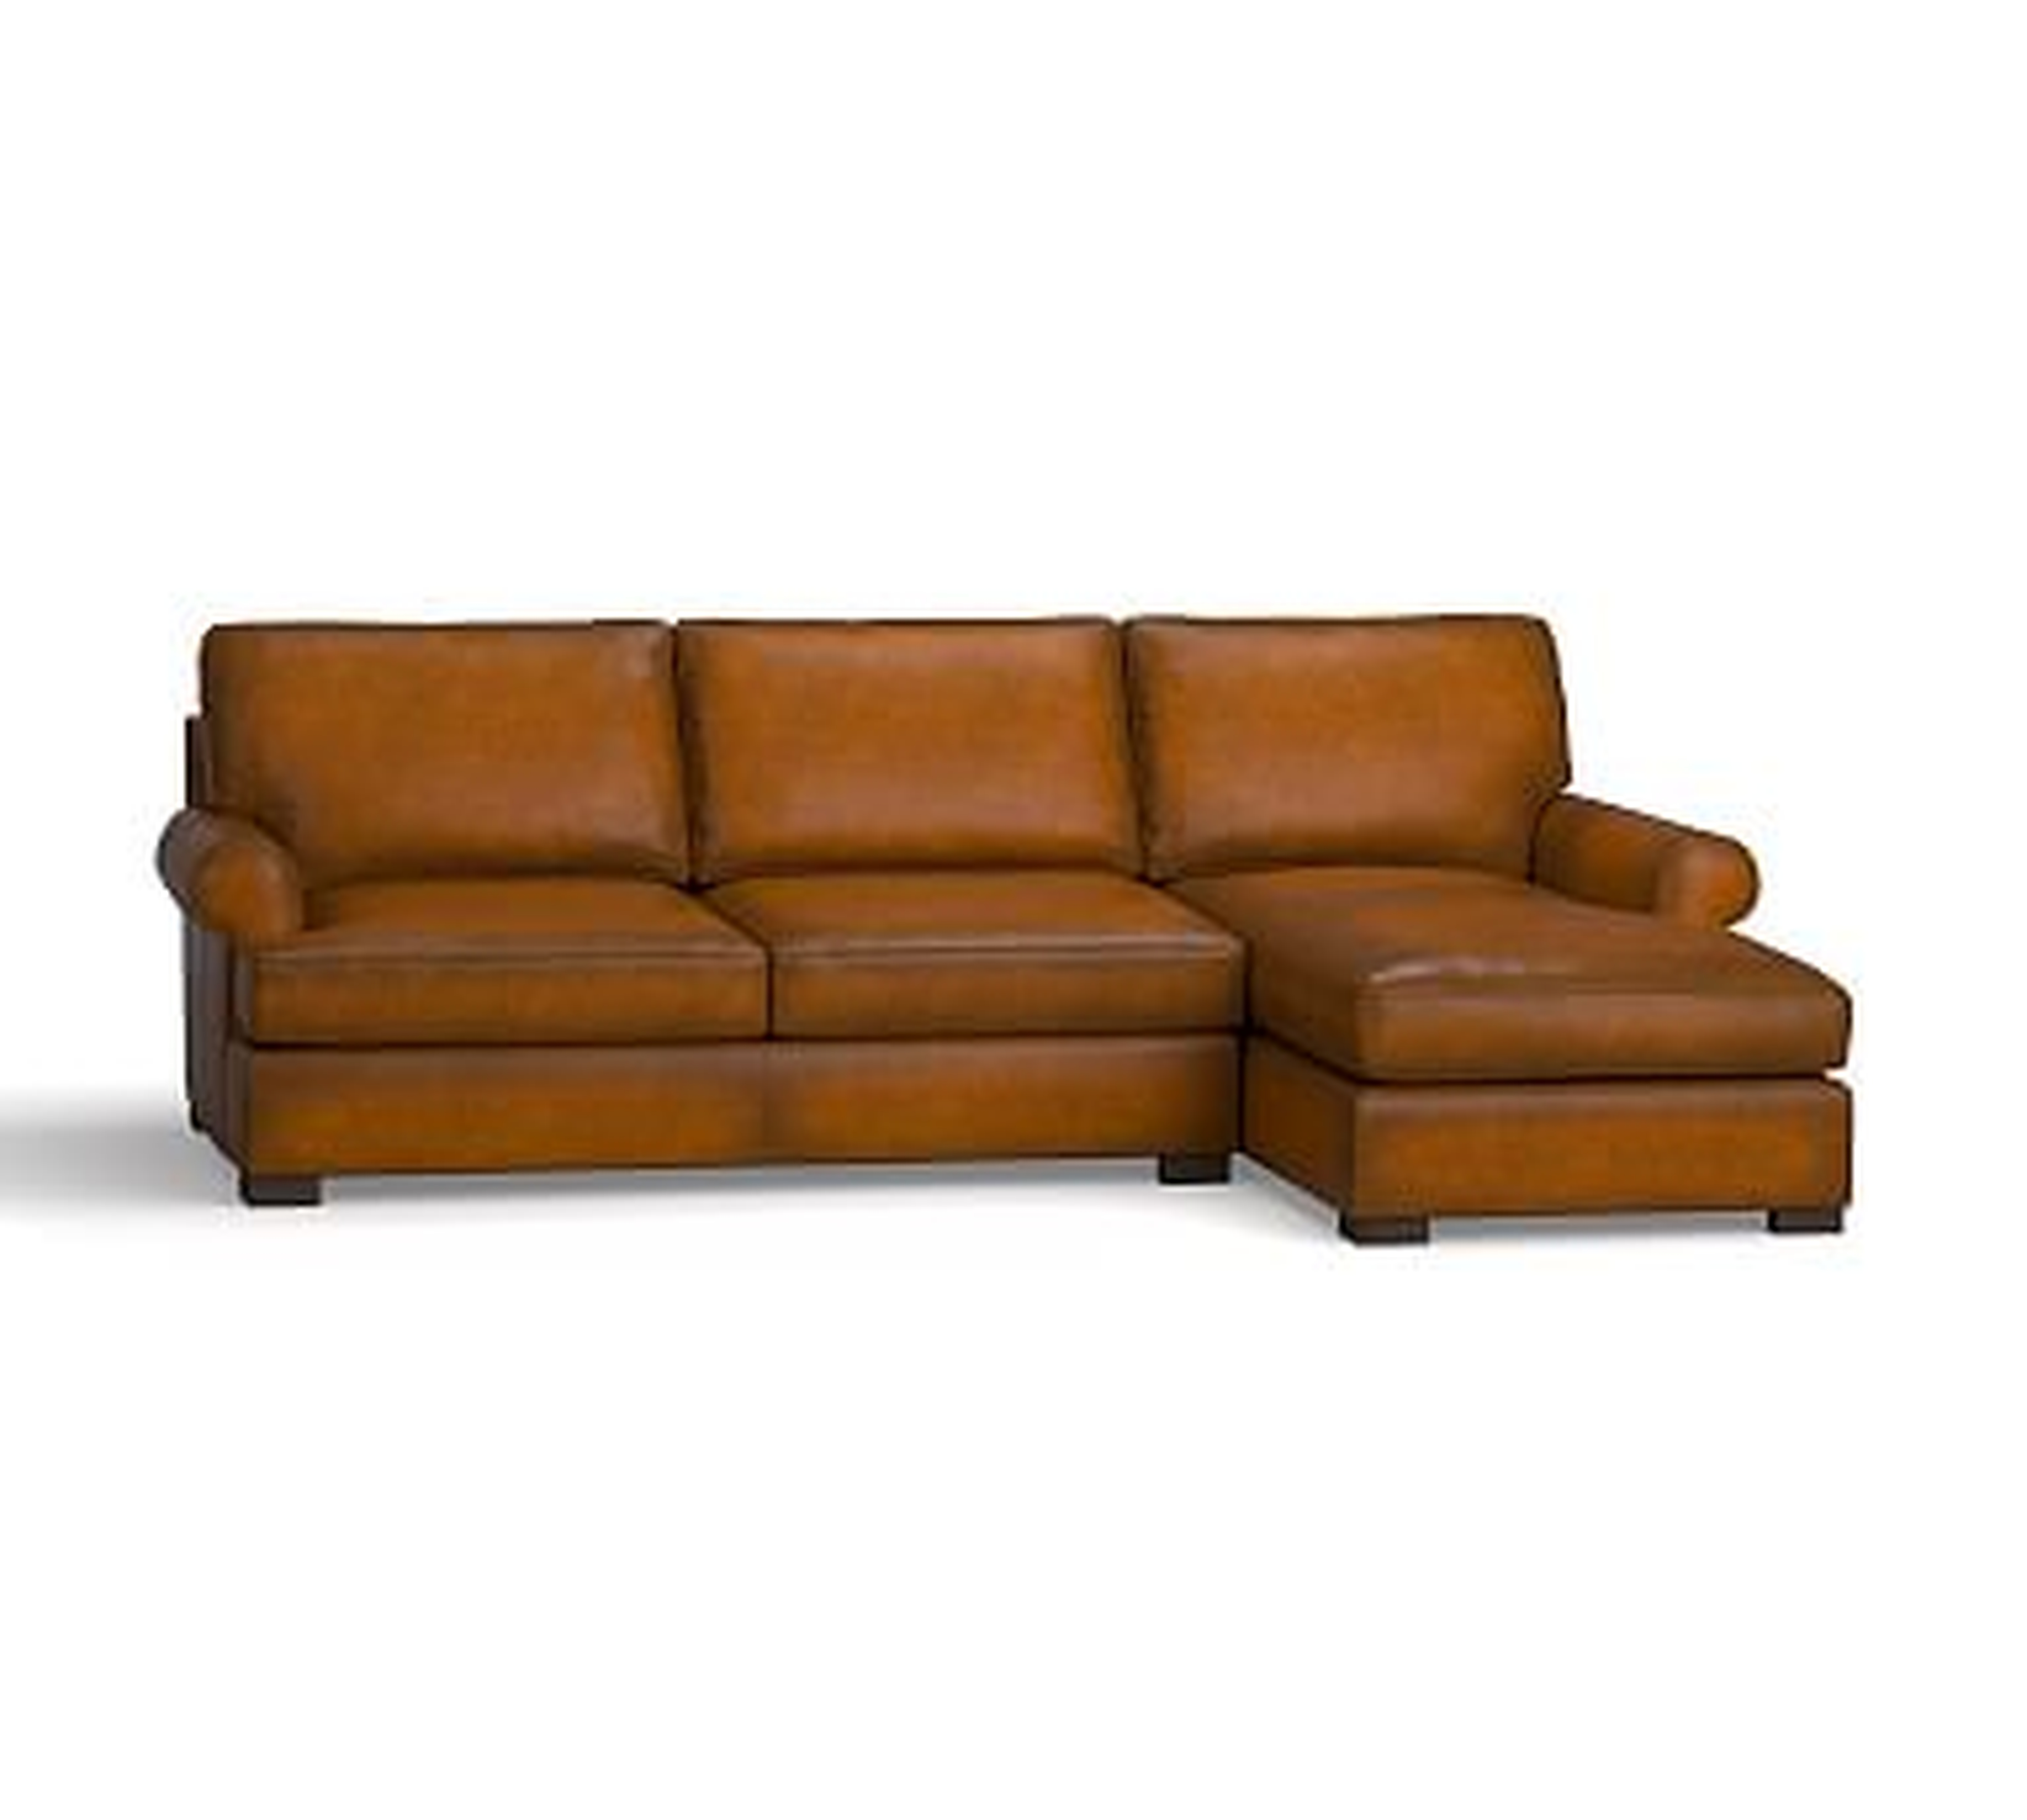 Townsend Roll Arm Leather Left Chaise Sofa Sectional, Polyester Wrapped Cushions, Leather Burnished Bourbon - Pottery Barn